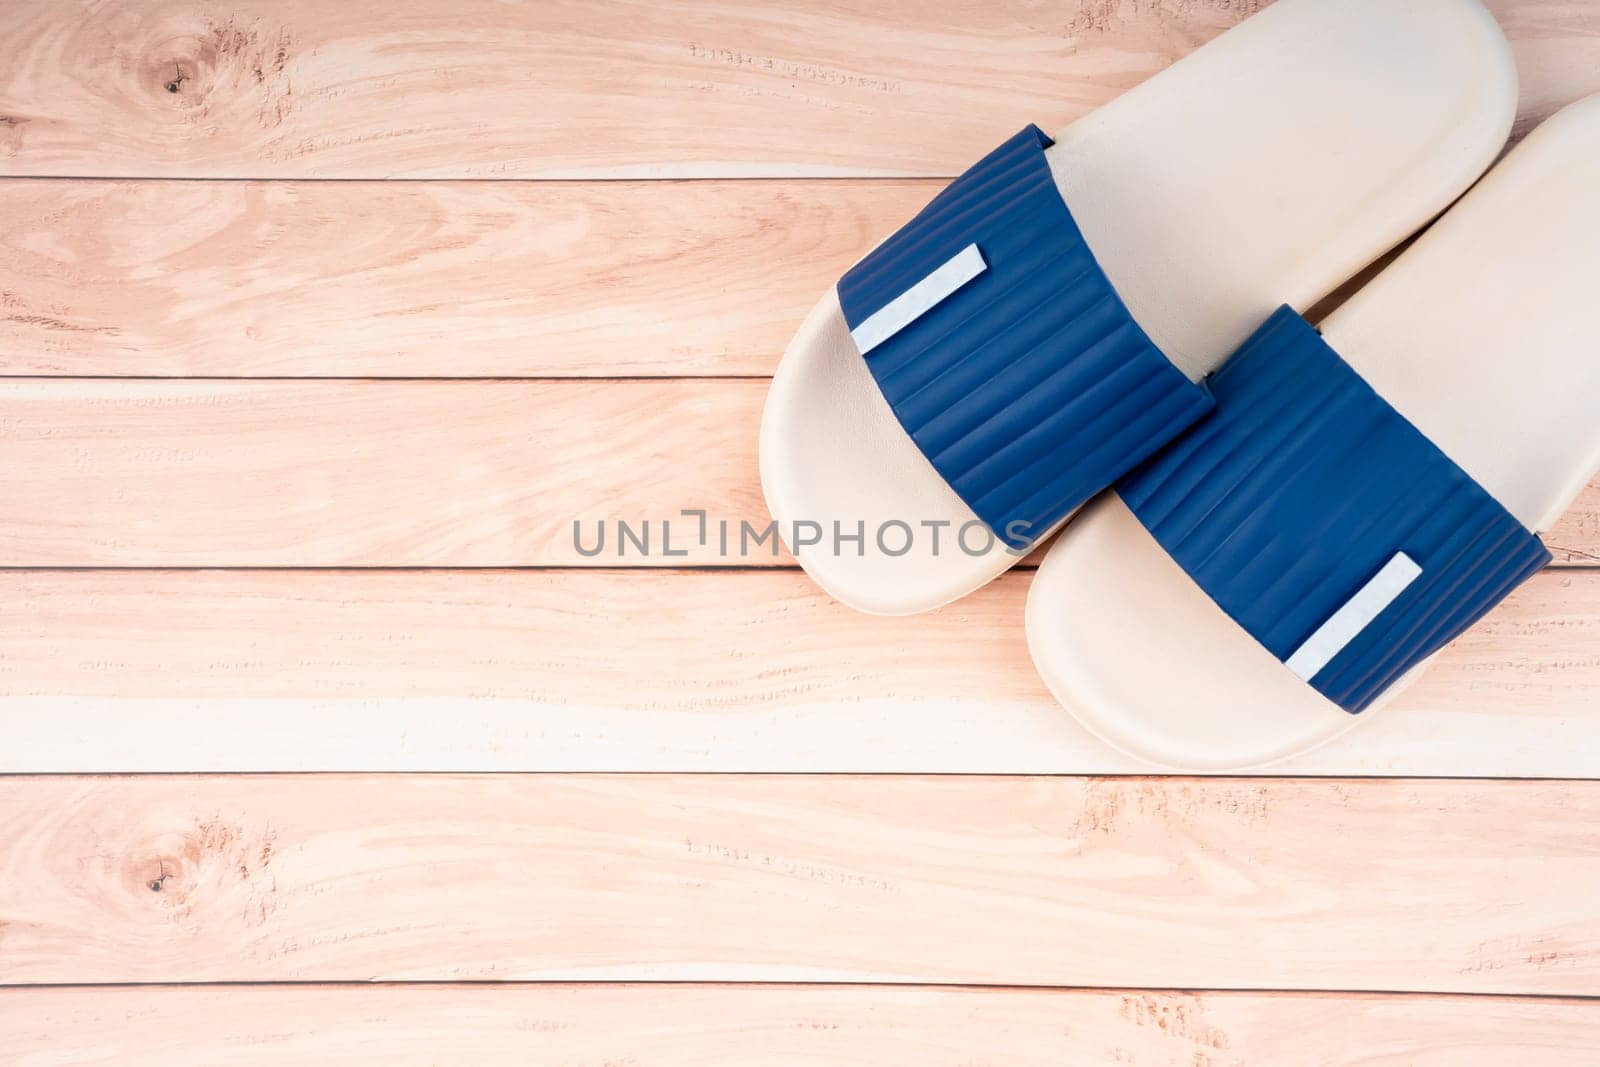 White and blue color rubber slipper shoes on wooden floor with copy space. Summer holiday vacation concept.